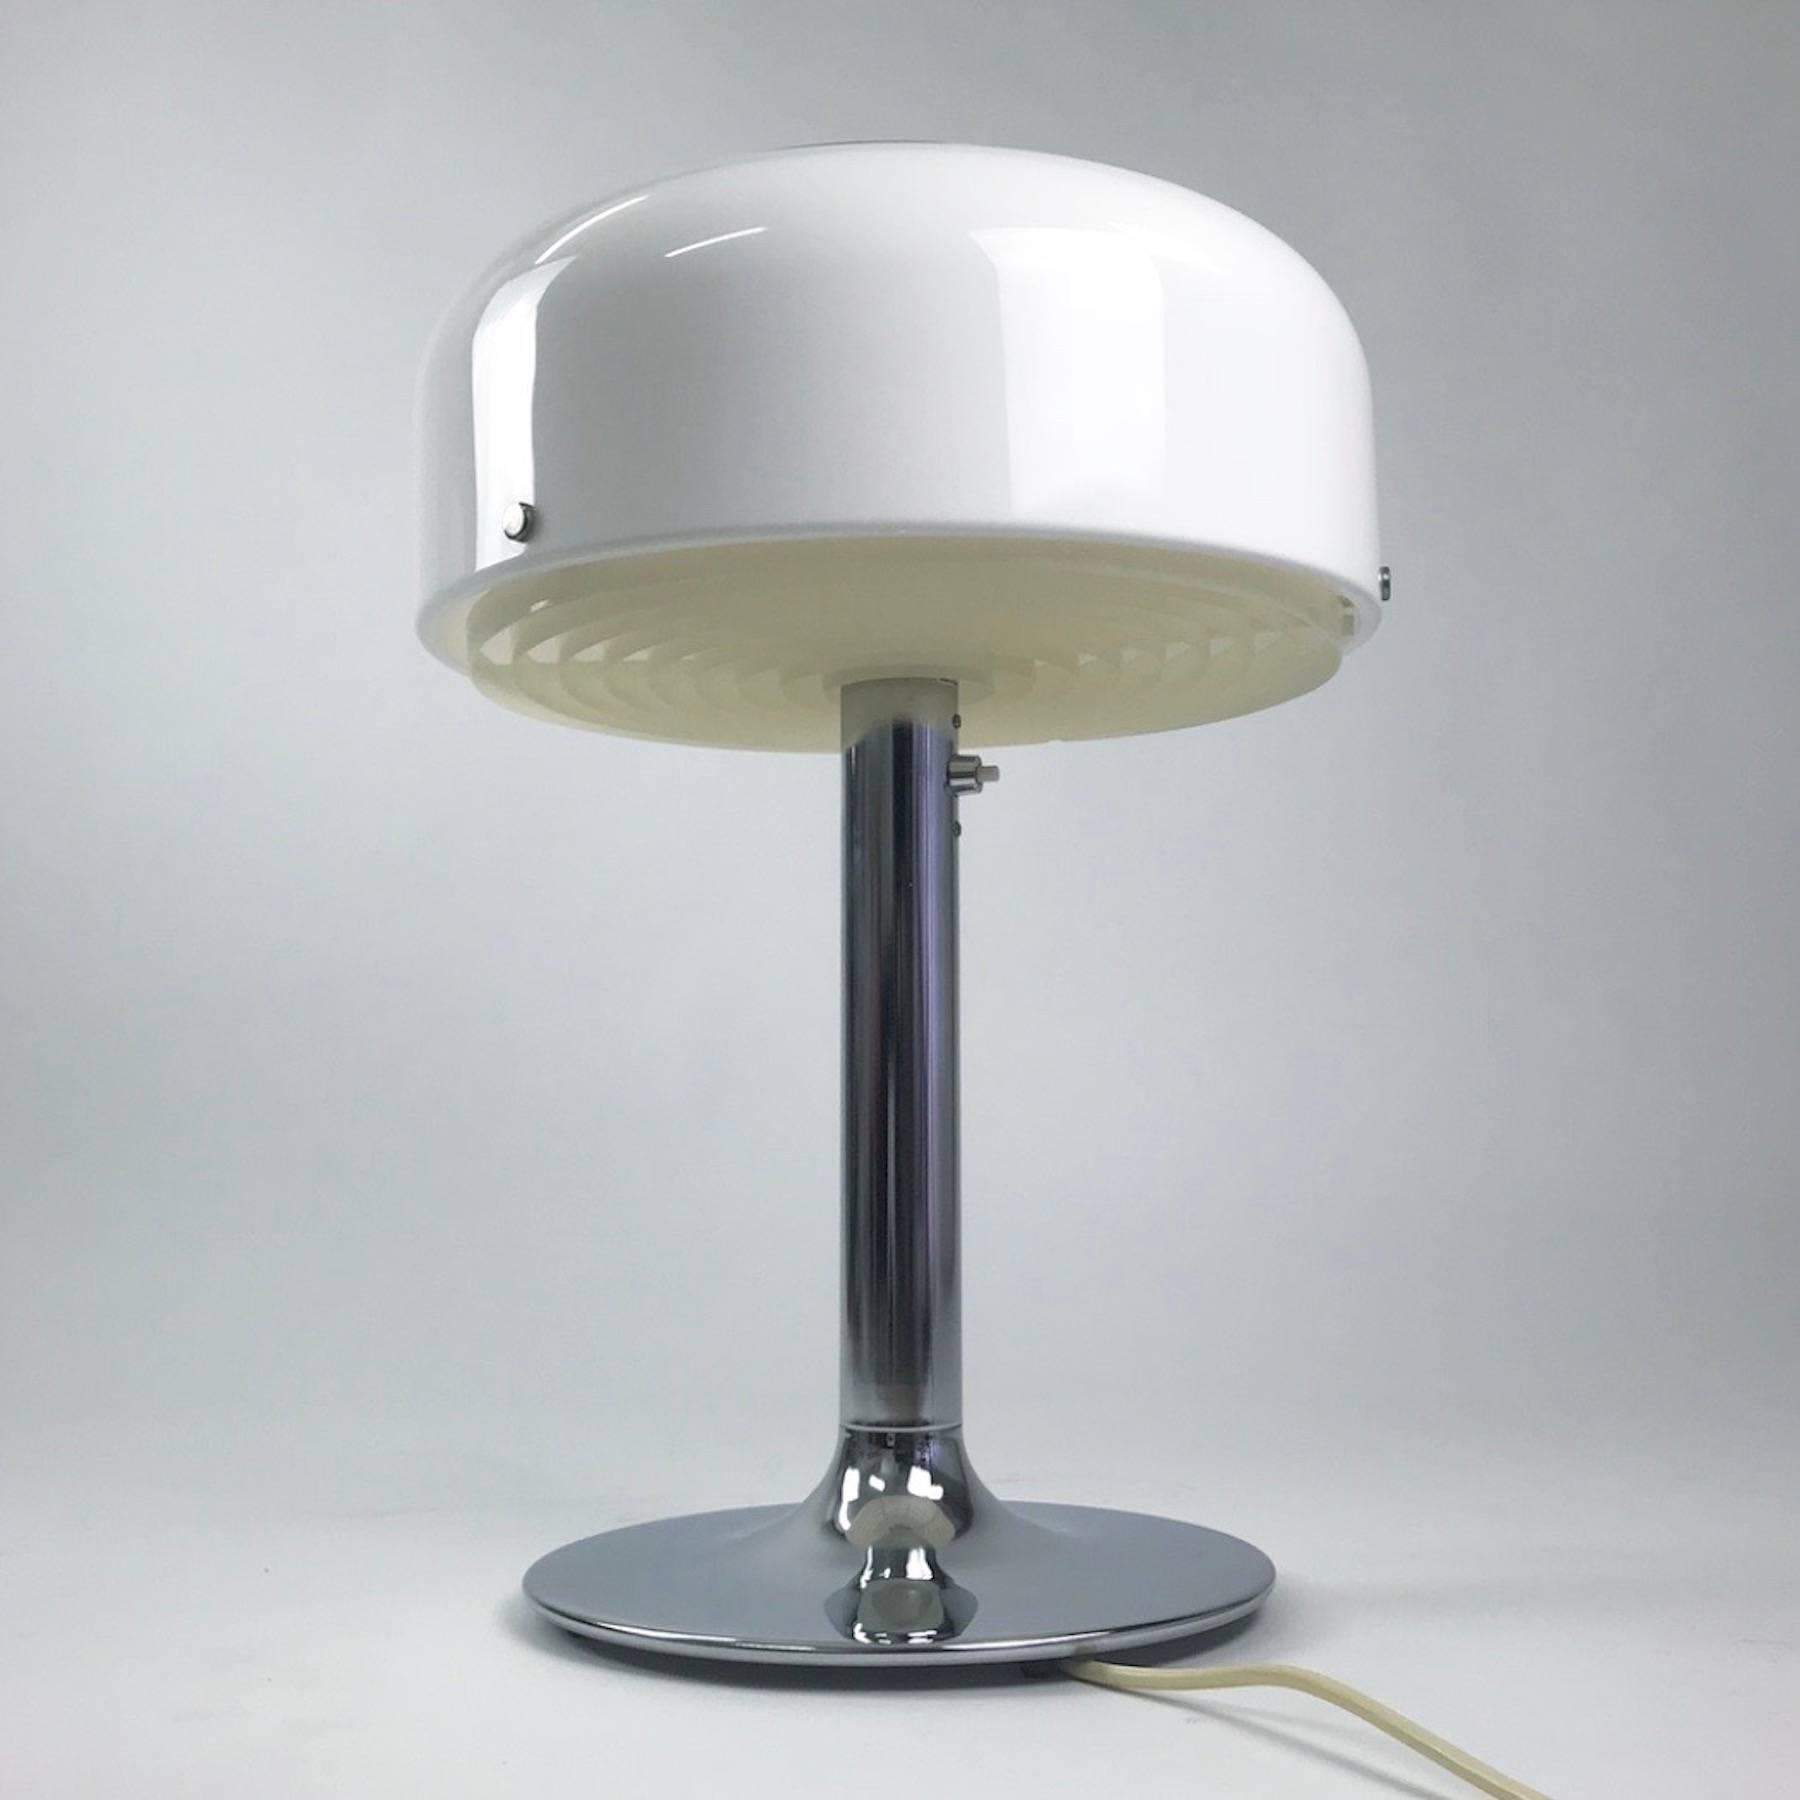 This incredible light is a stunning piece of Swedish light design. 

The Knubbling was designed in 1966 by Anders Pehrson, head of design at Ateljé Lyktan, Sweden. 

The white shade combined with the chrome stem adds coolness to the light but